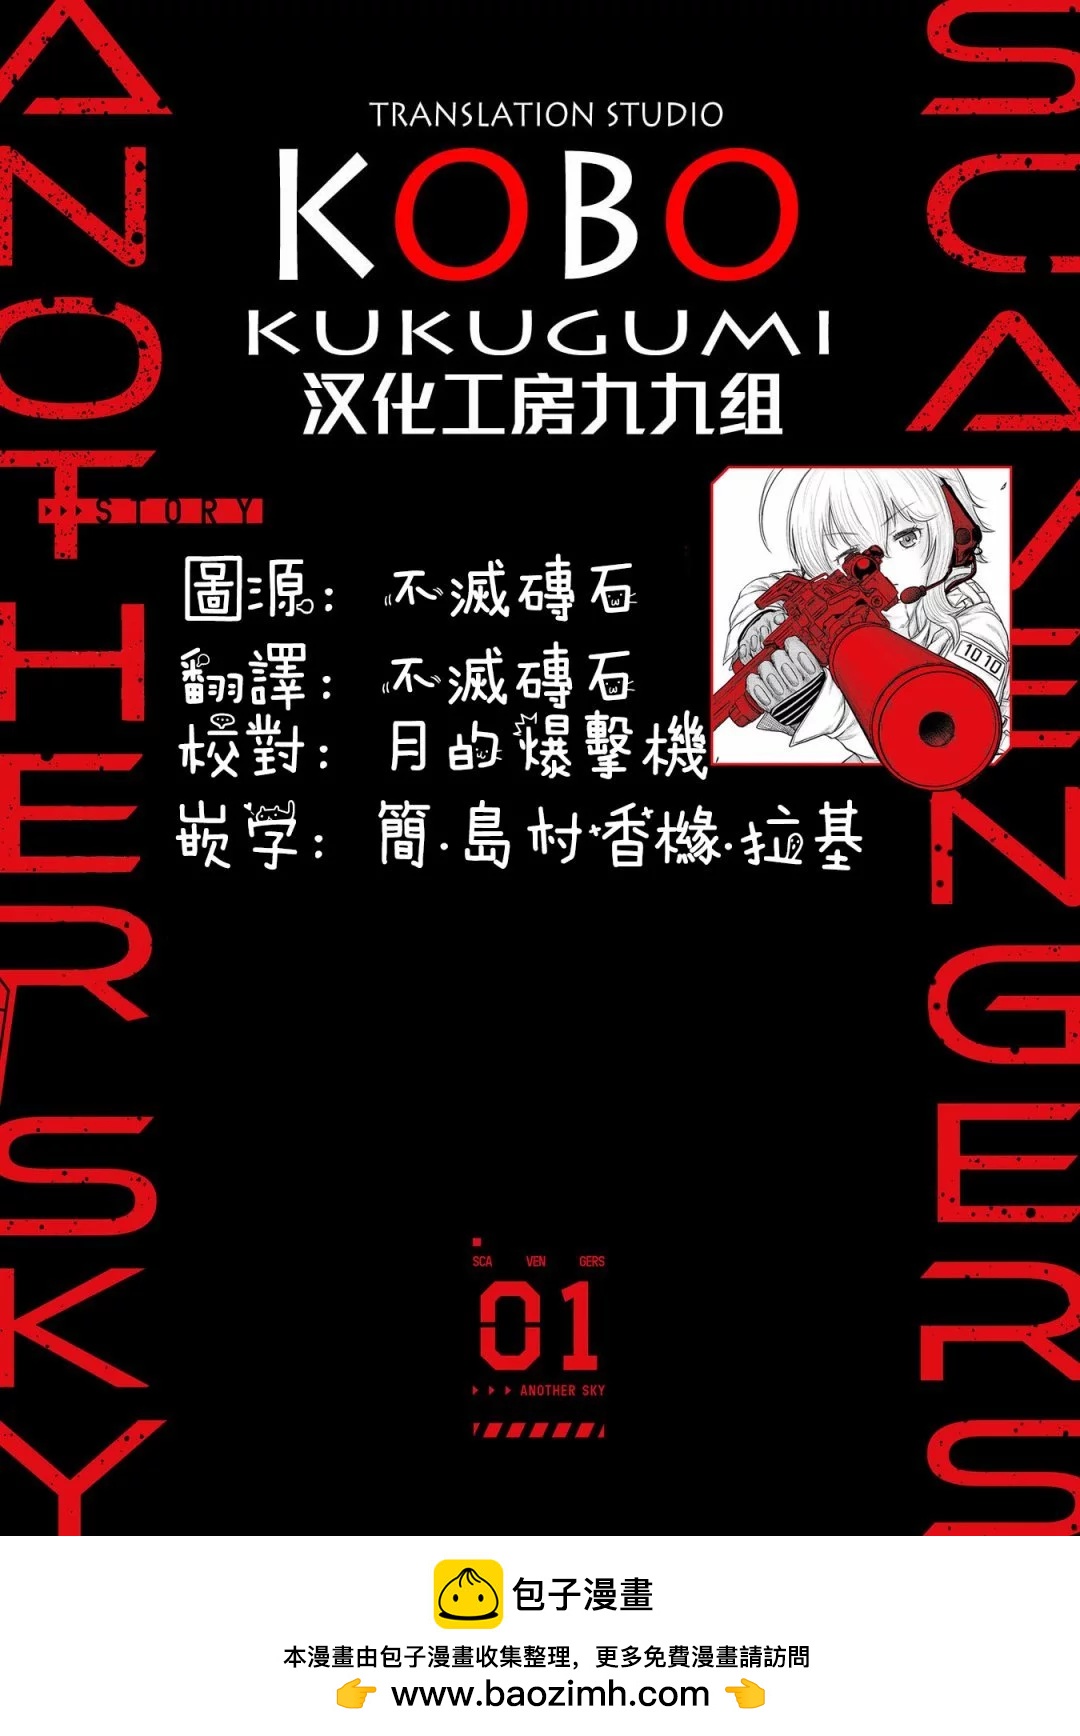 Scavengers Another Sky - 第03話 - 5